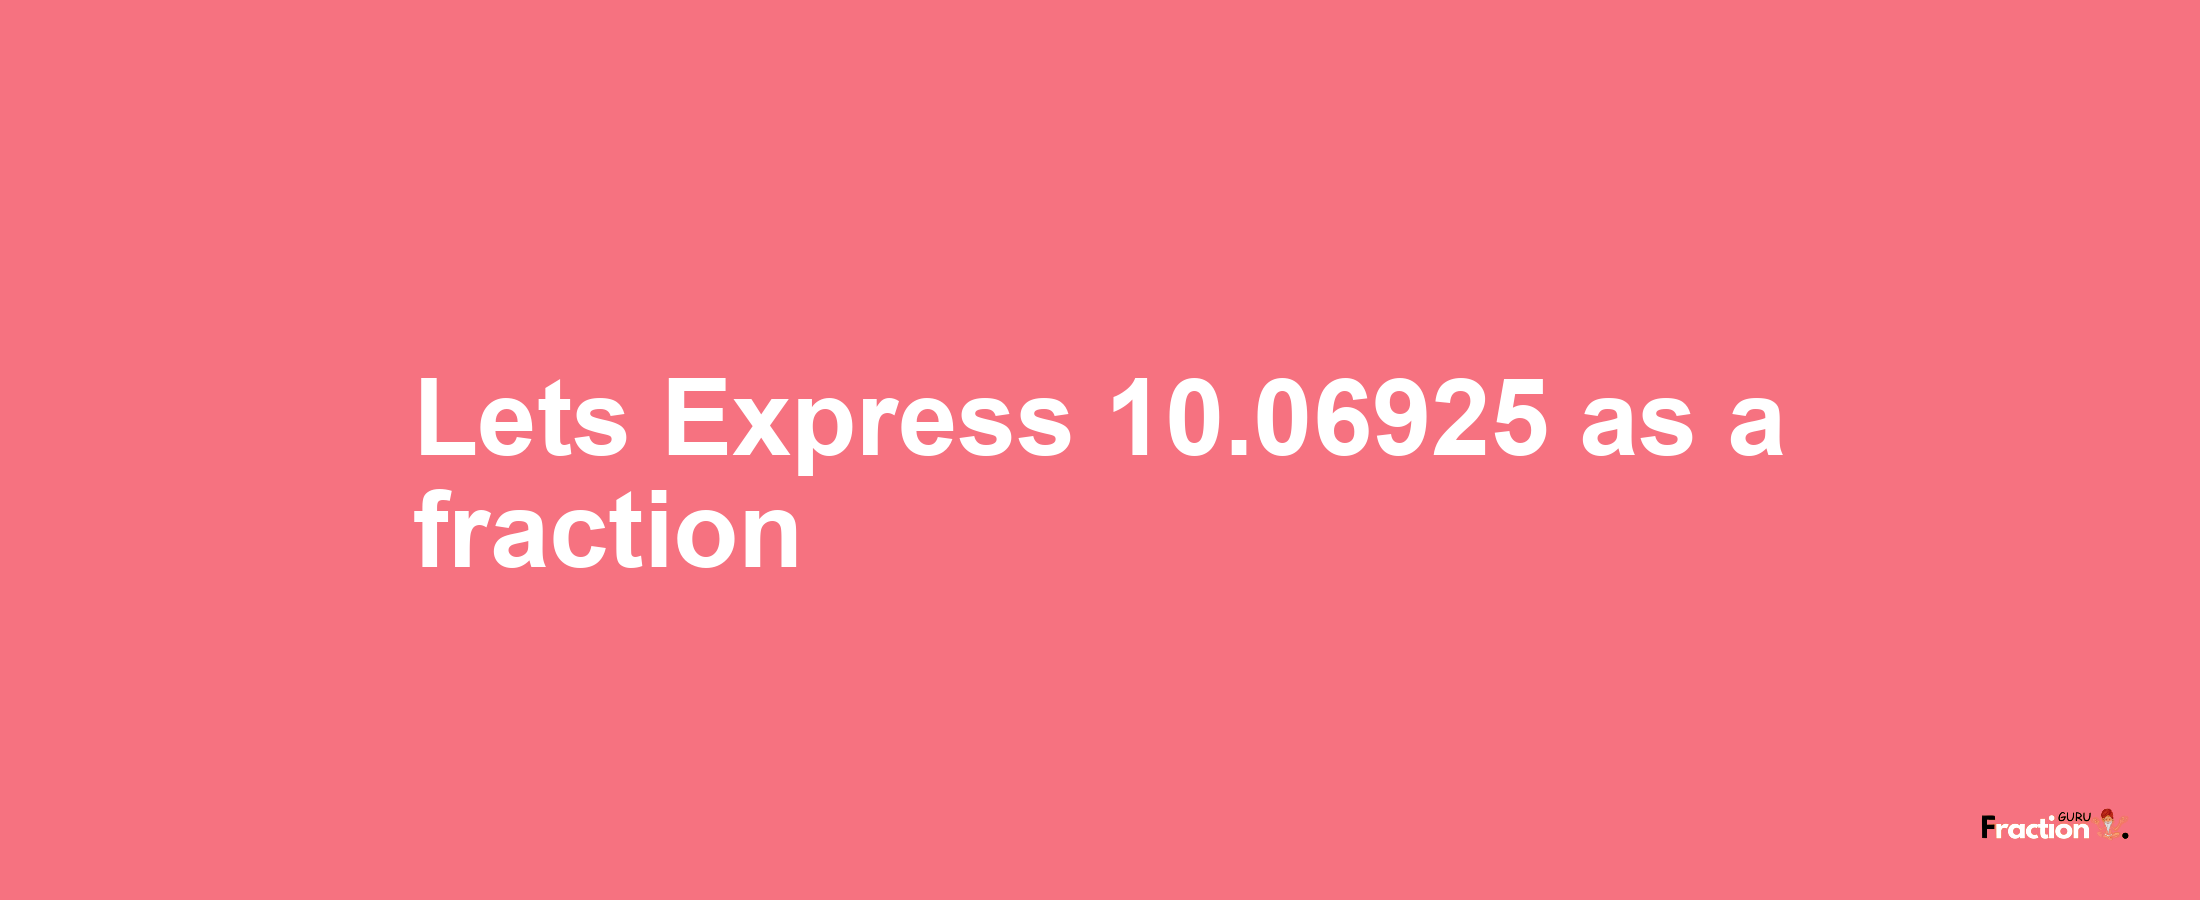 Lets Express 10.06925 as afraction